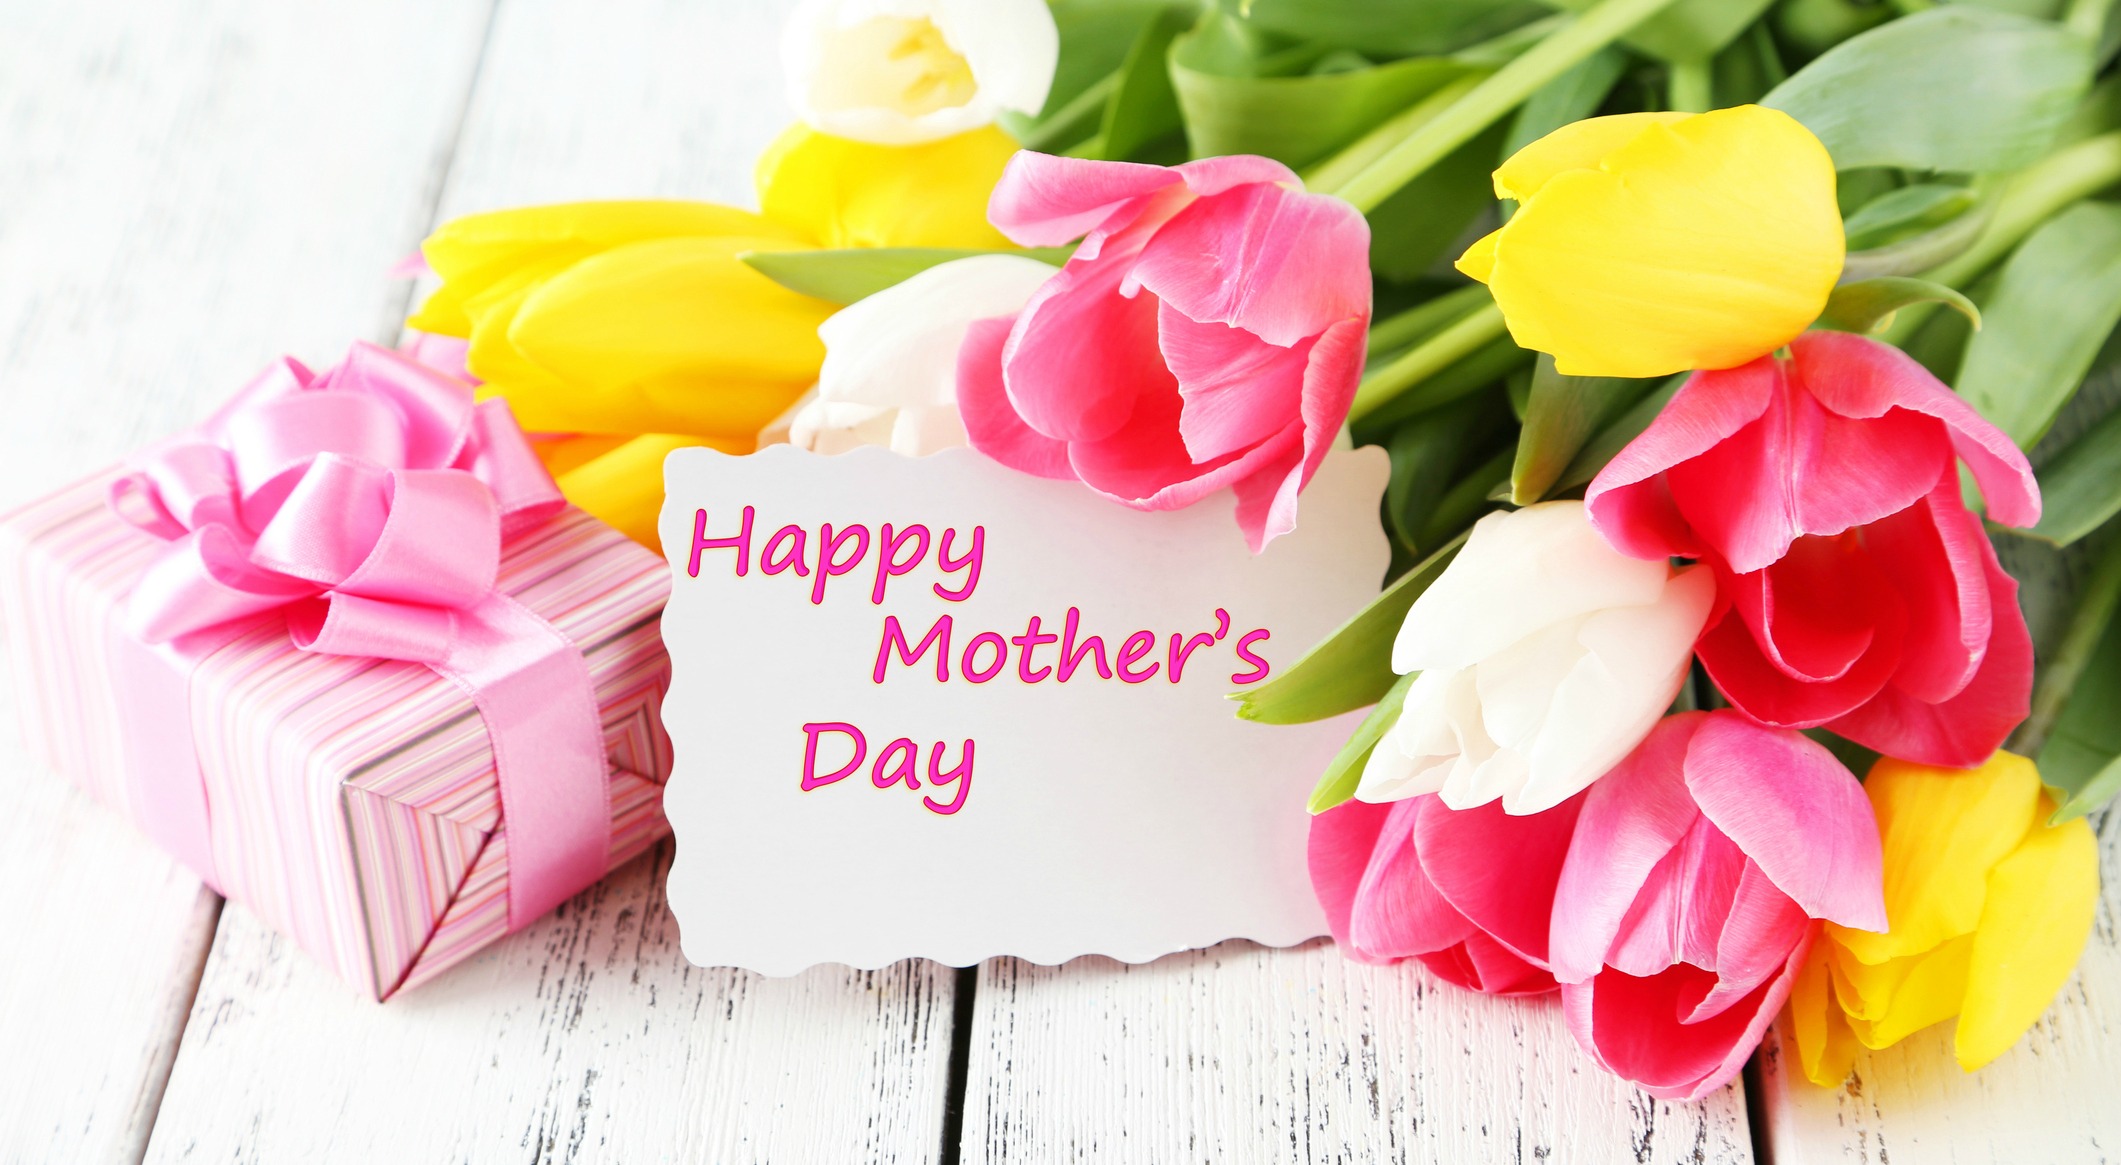 Virtual Mother’s Day Classes Just For You! 